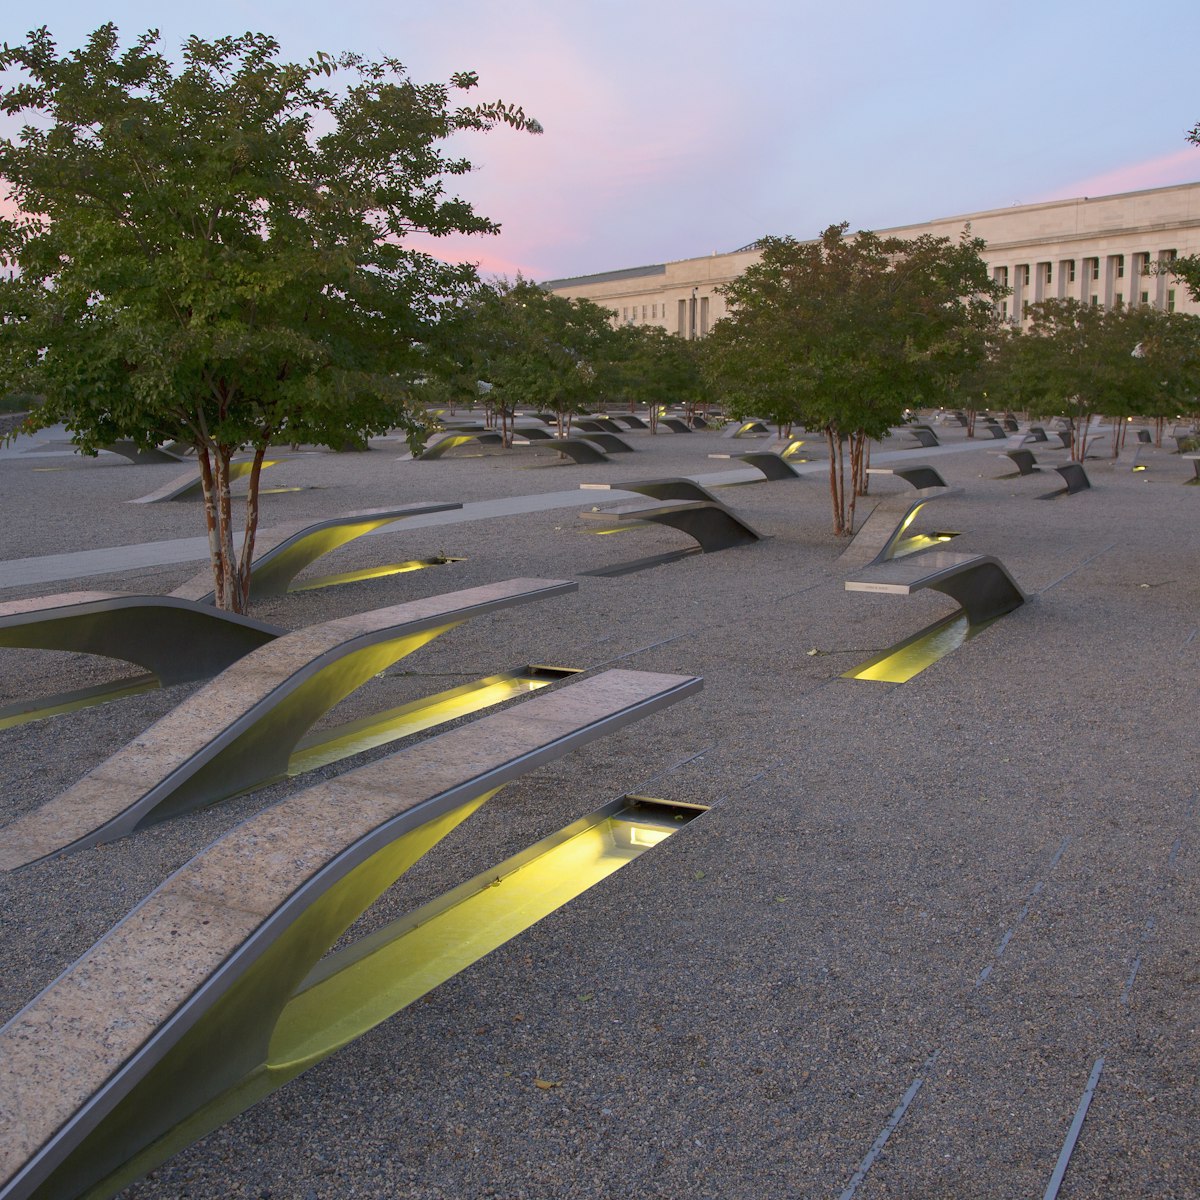 The Pentagon Memorial features 184 empty benches at sunset, a memorial to commemorate the anniversary of the September 11th attacks, in Arlington, Virginia.